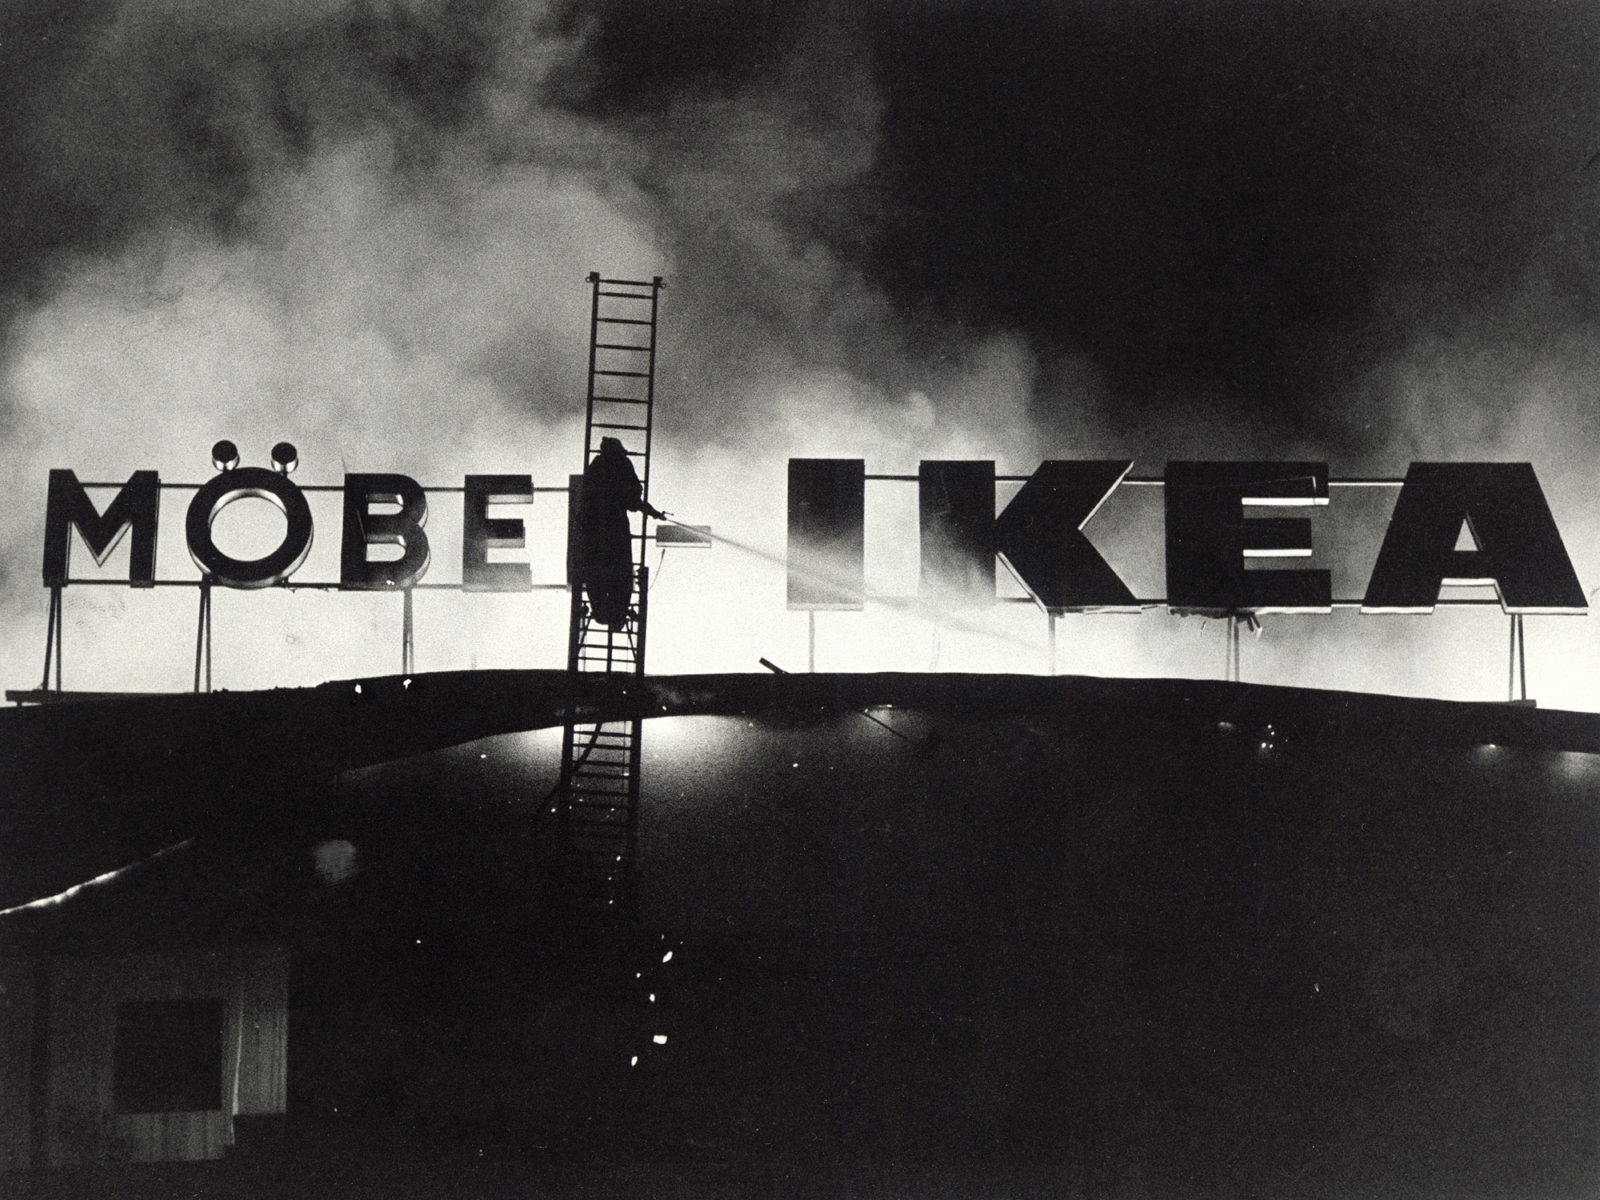 A fire-fighter stands on top of a fire truck ladder spraying water on a neon sign with text FURNITURE IKEA in Swedish.